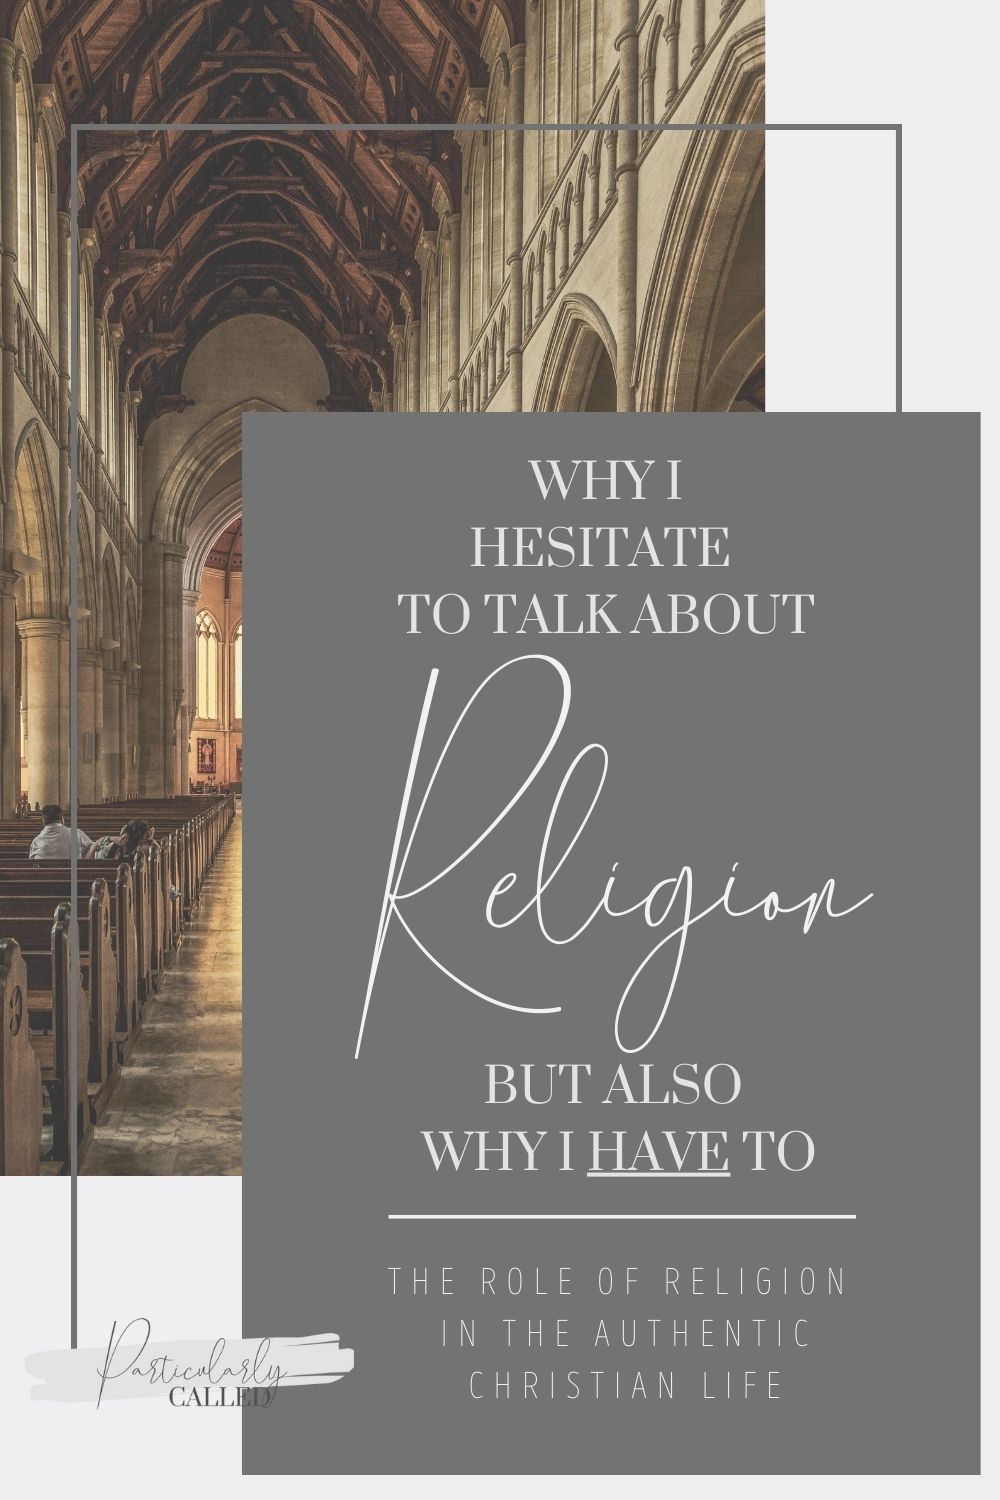 The Role of Religion in the Authentic Christian Life